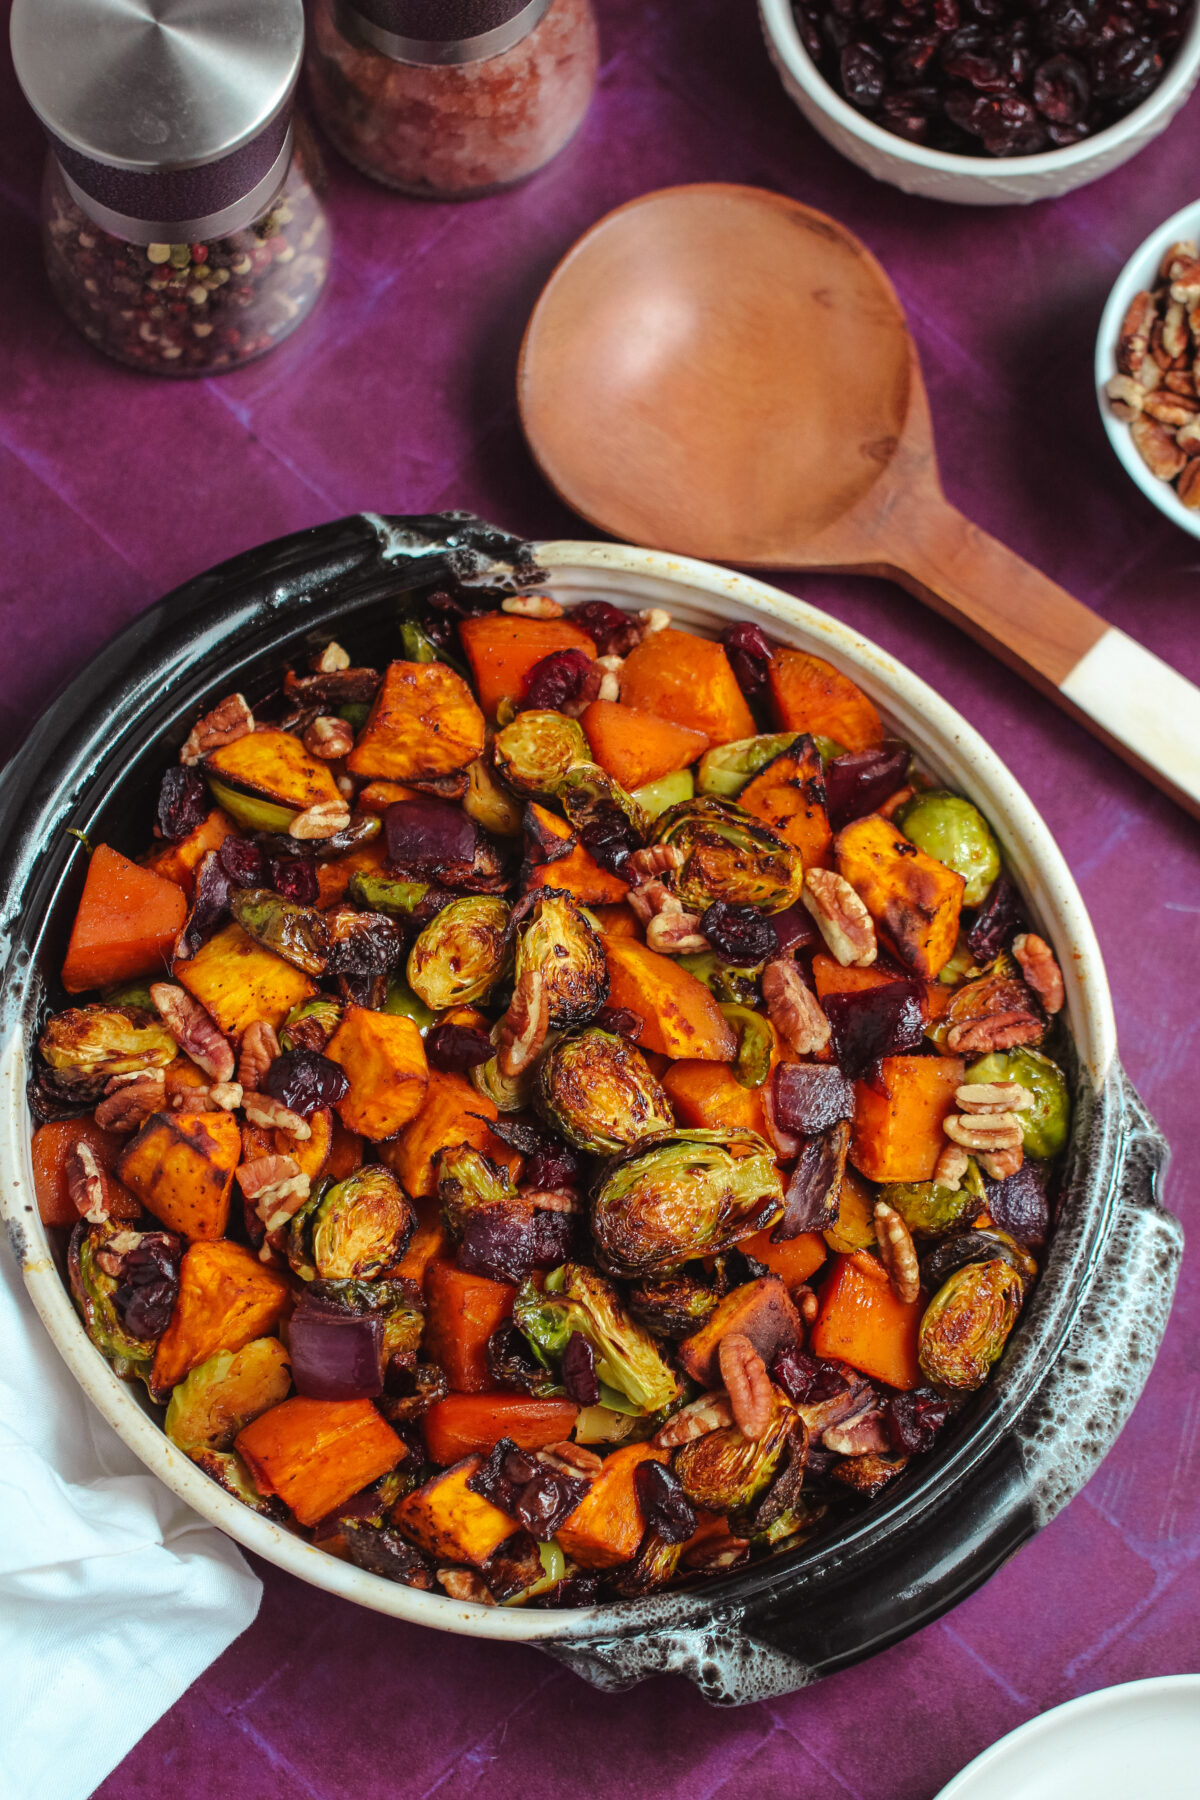 Enjoy fall flavours with this tasty roasted brussels sprouts and sweet potatoes recipe. Perfect for a weeknight meal or holiday feast!